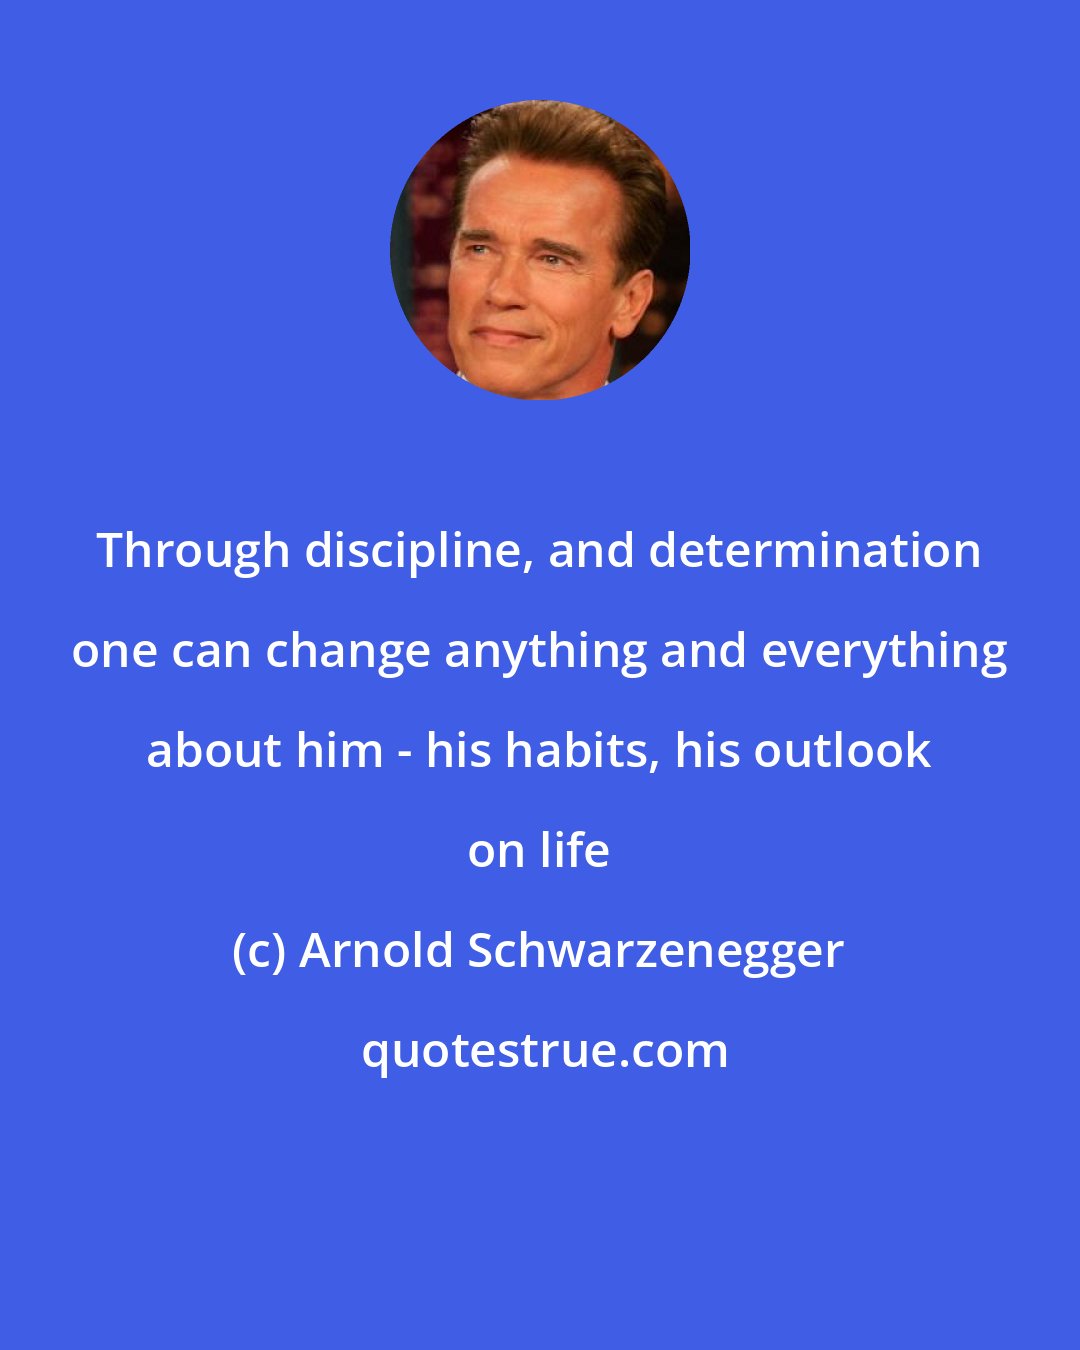 Arnold Schwarzenegger: Through discipline, and determination one can change anything and everything about him - his habits, his outlook on life